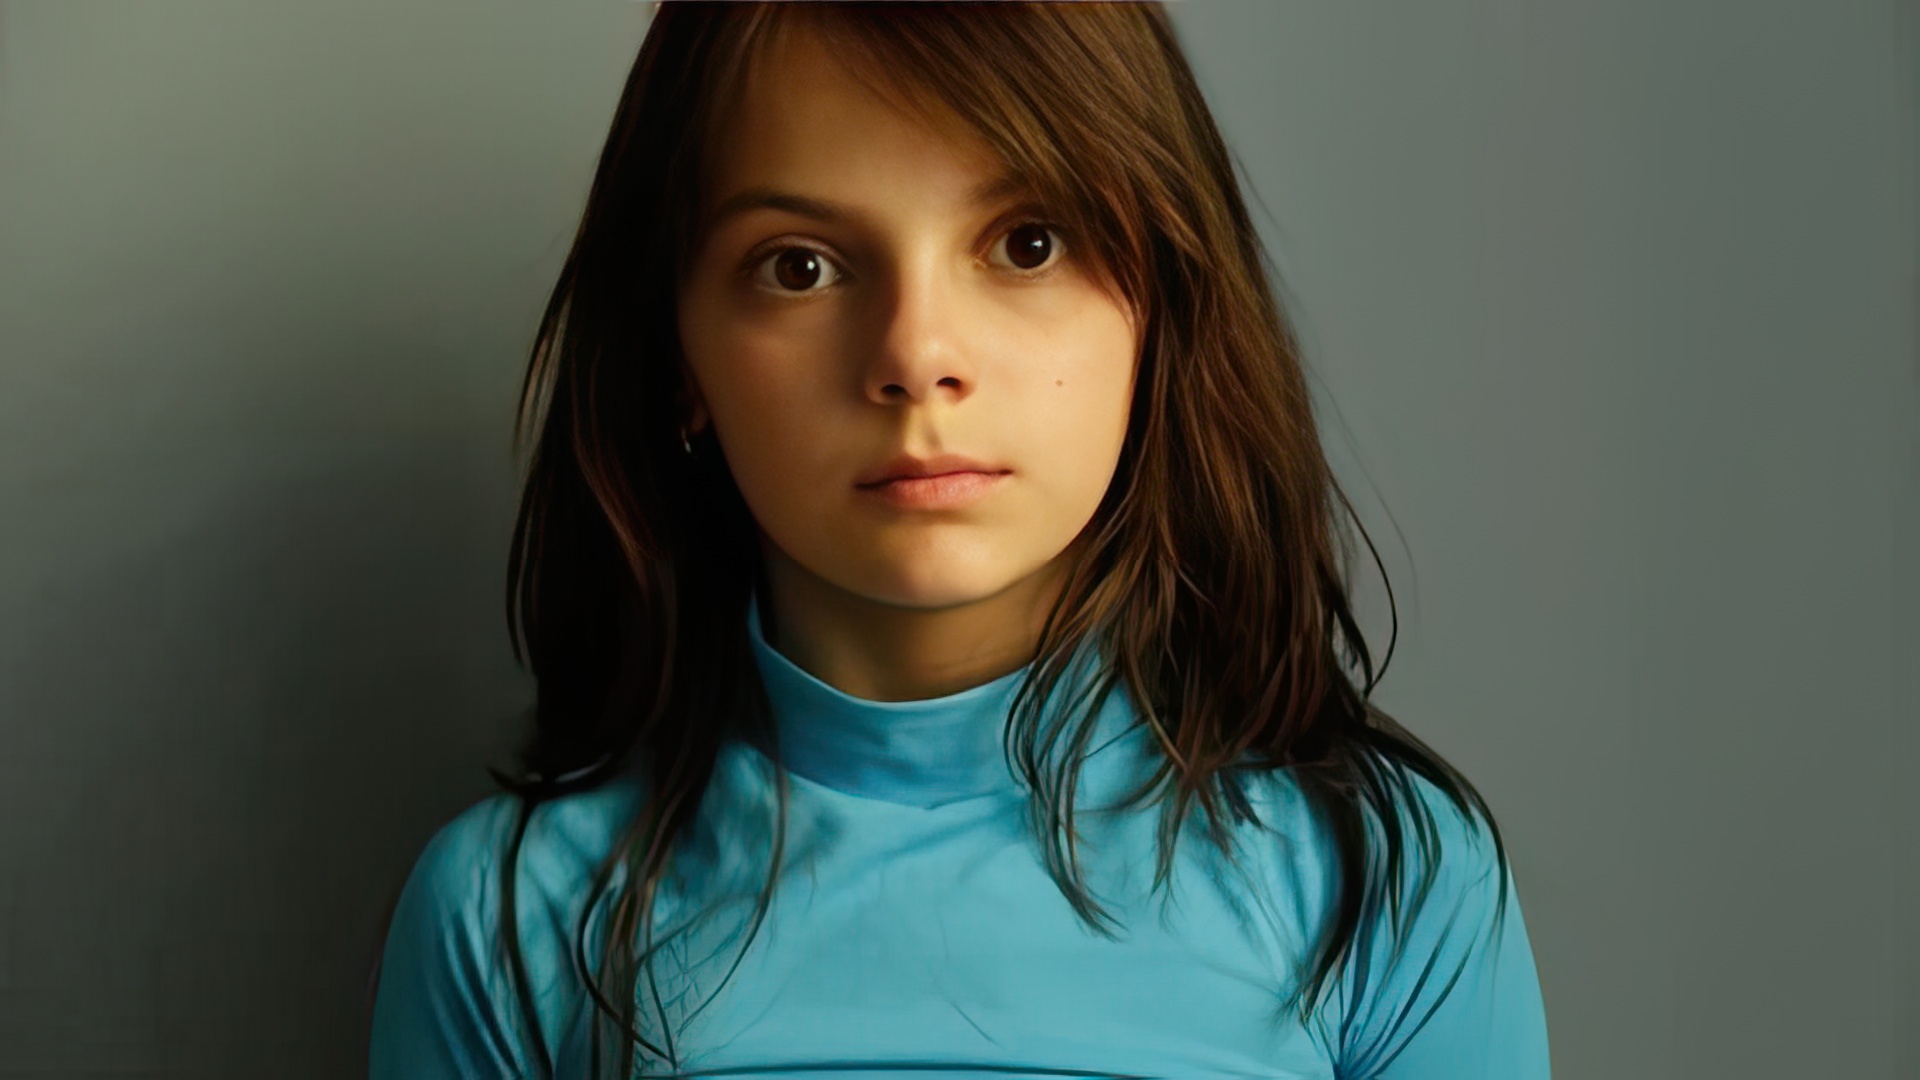 Young and perspective actress Dafne Keen